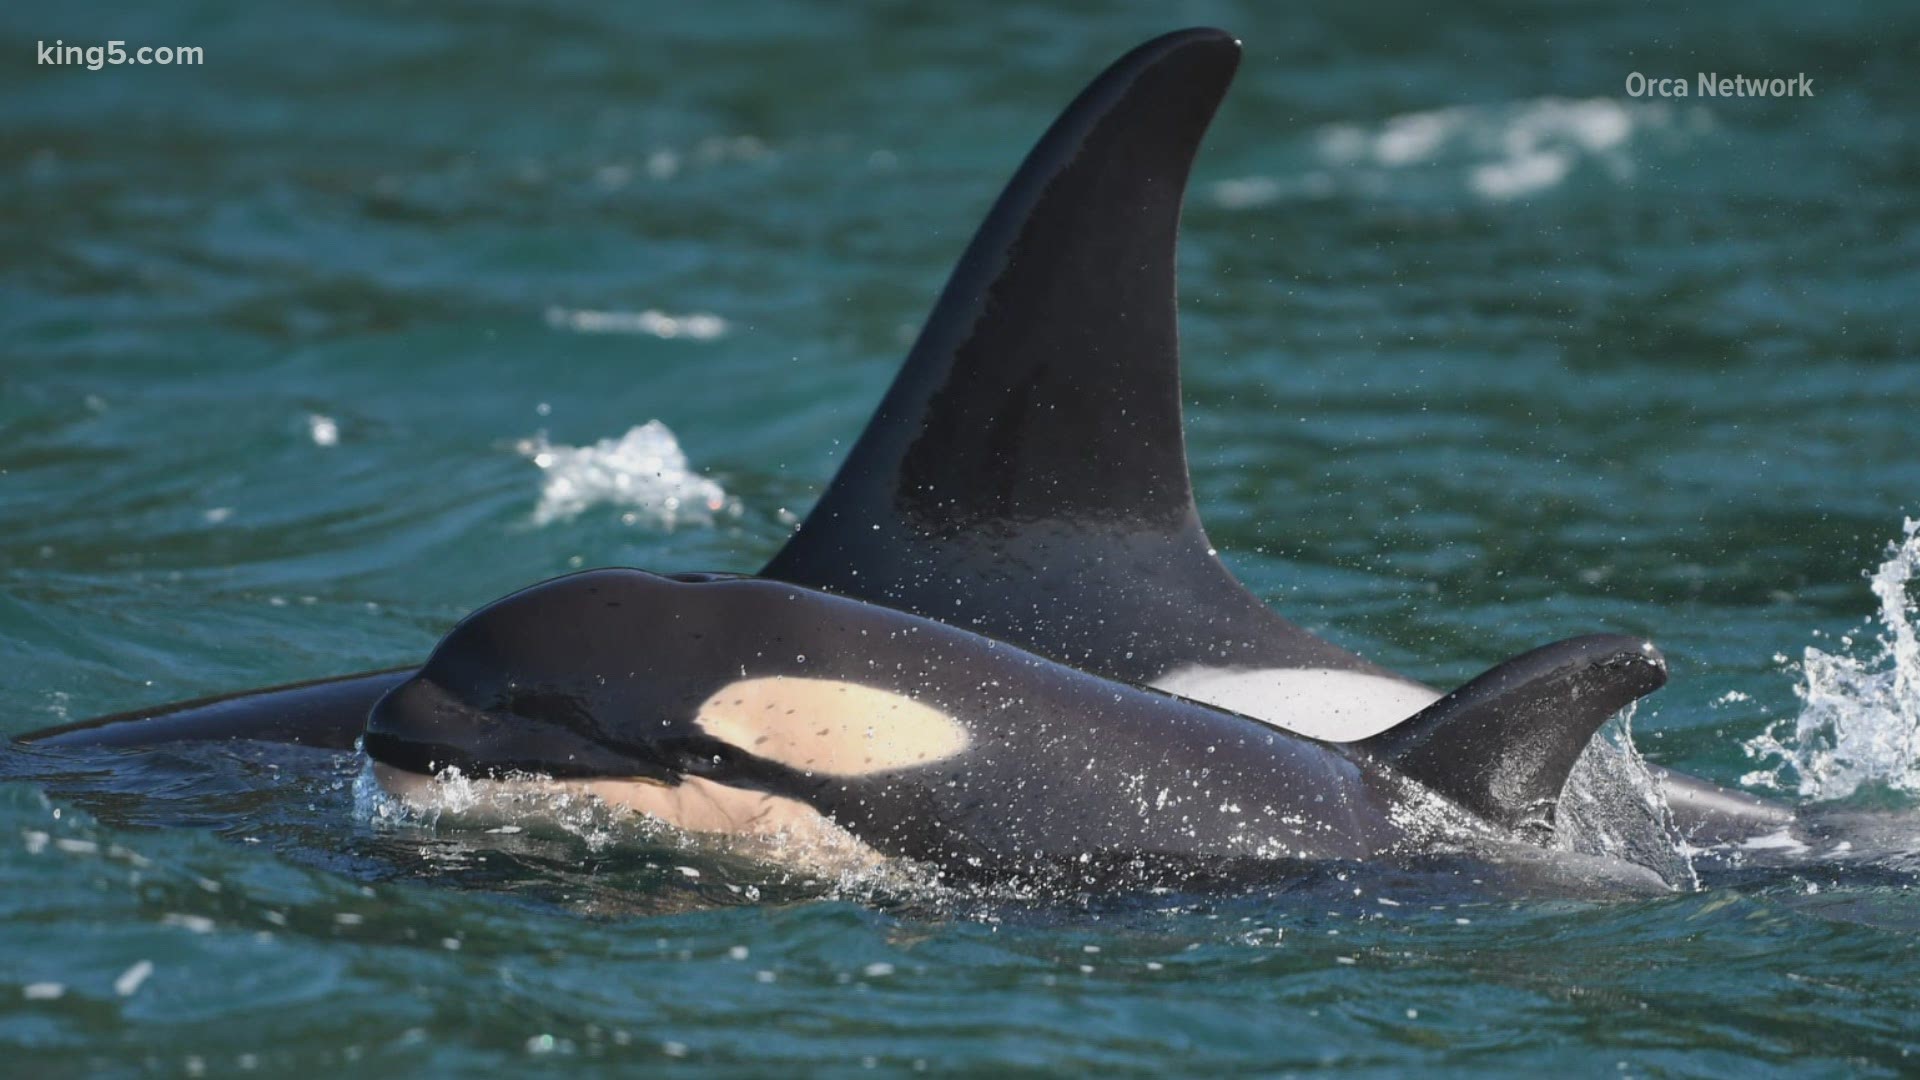 This is great news for the endangered Southern Resident orcas. Two calves were also born to the J pod in September.